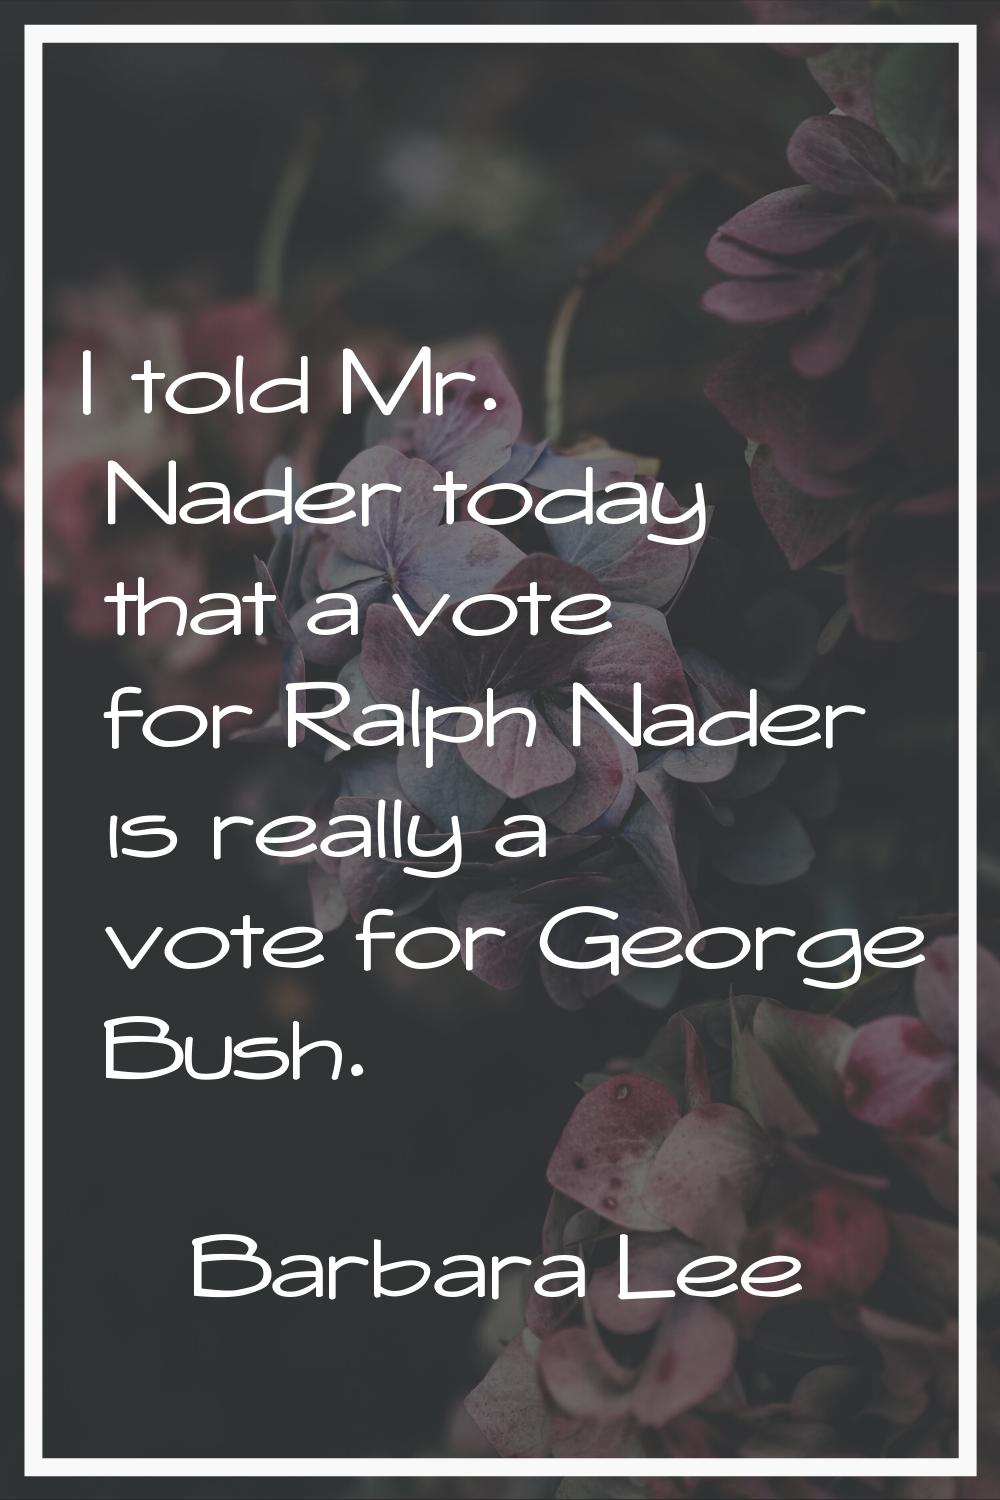 I told Mr. Nader today that a vote for Ralph Nader is really a vote for George Bush.